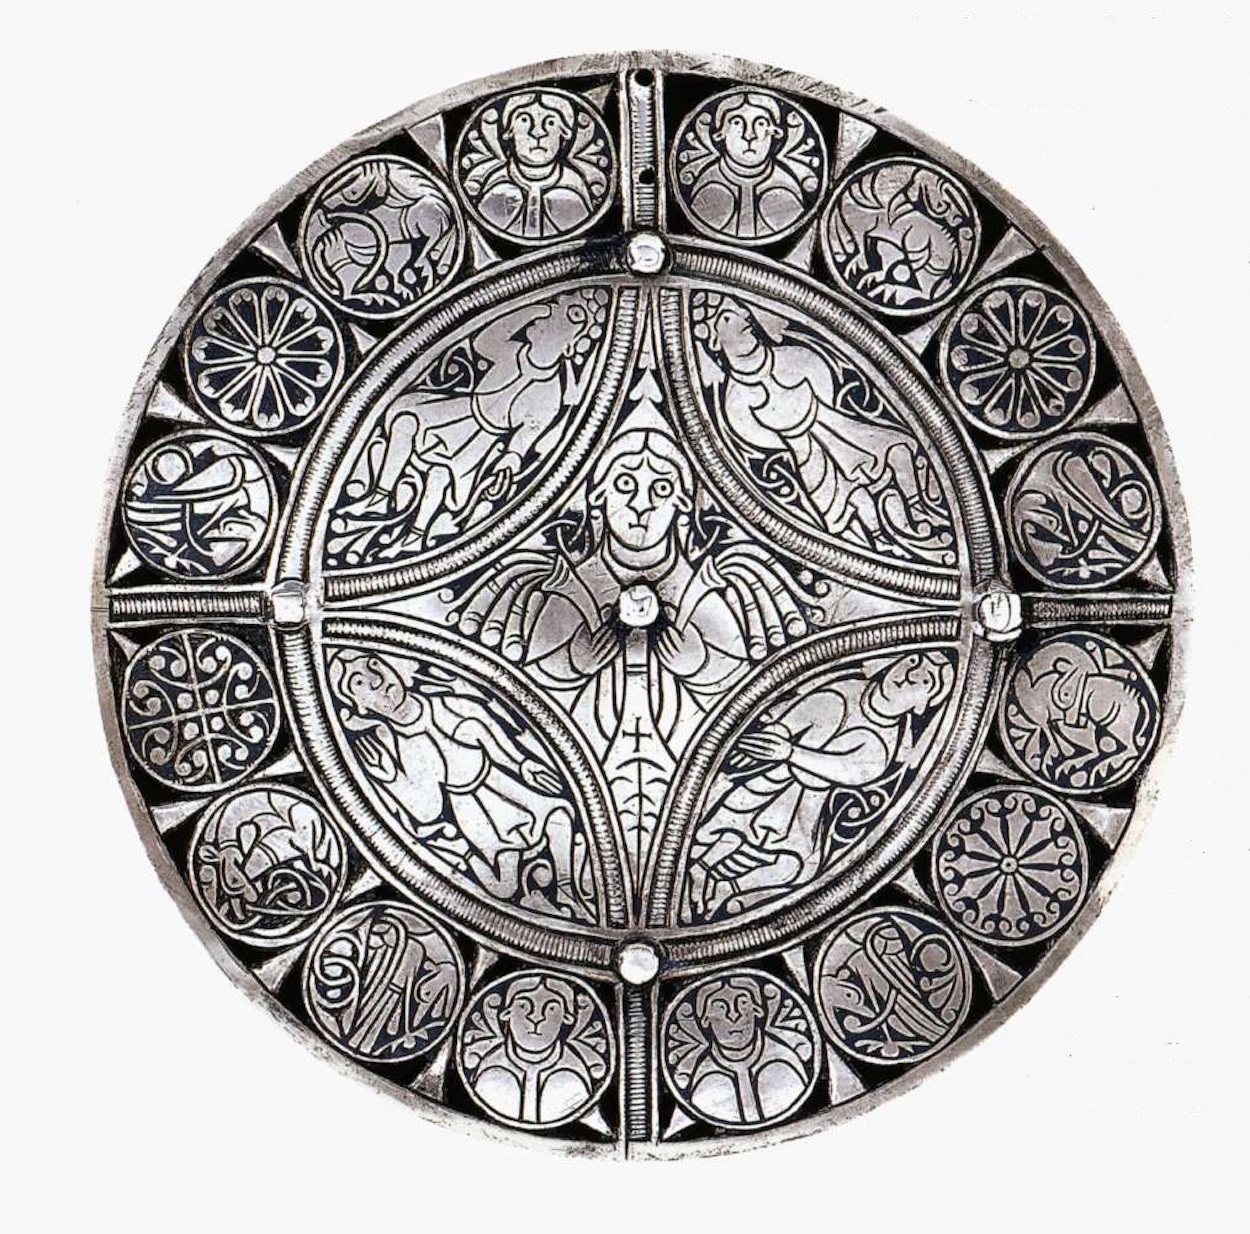 The “Fuller Brooch” by Unknown Artist - Late 9th century - 114 mm (dia.) British Museum